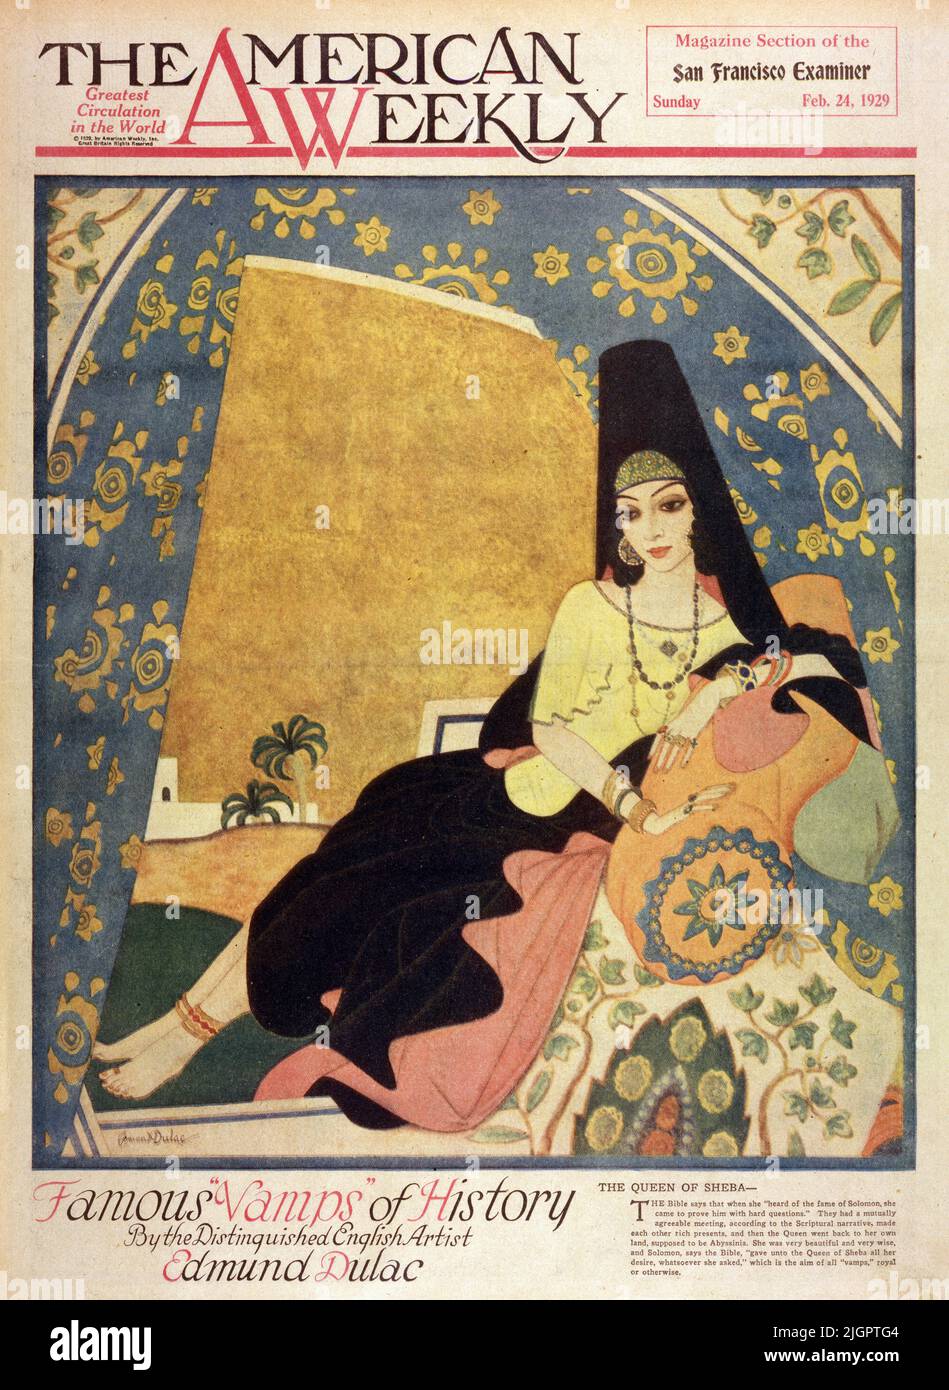 'The Queen of Sheba' published on Feb.24,1939 in the American Weekly Sunday magazine painted bt Edmund Dulac for the 'Famous Vamps of History' series. The Bible says that when she “heard of the fame of Solomon, she came to prove him with hard questions.” They had a mutually agreeable meeting, according to the scriptural narrative, made each other rich presents, and then the Queen went back to her own land, supposed to be Abyssina. She was very beautiful and very wise, and Solomon, says the Bible, “gave unto the Queen of Sheba all her desire,whatsoever she asked,” which is the aim of all “vamps Stock Photo